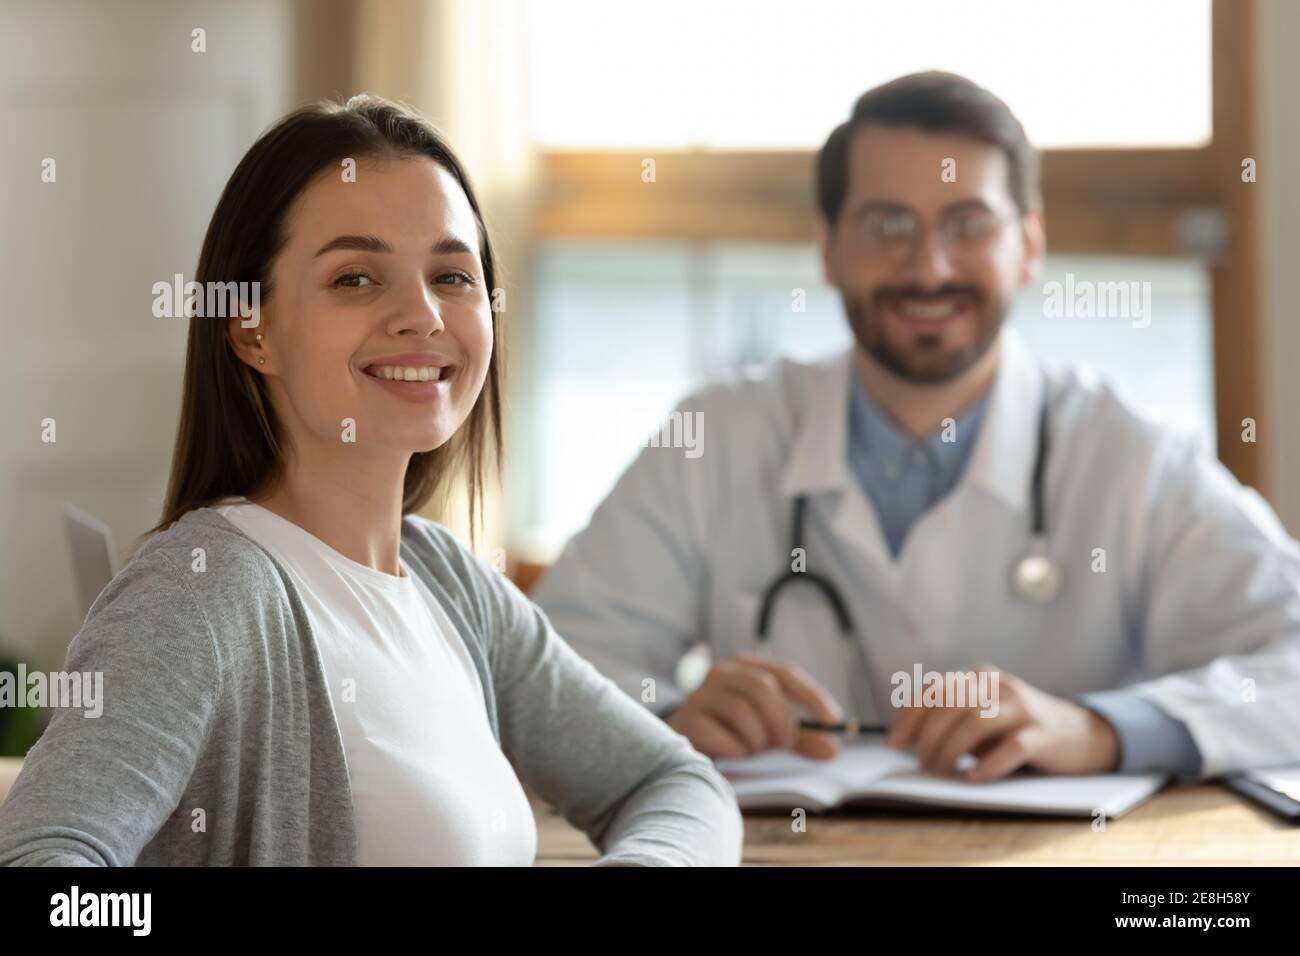 Portrait of happy female patient at hospital consultation Stock Photo